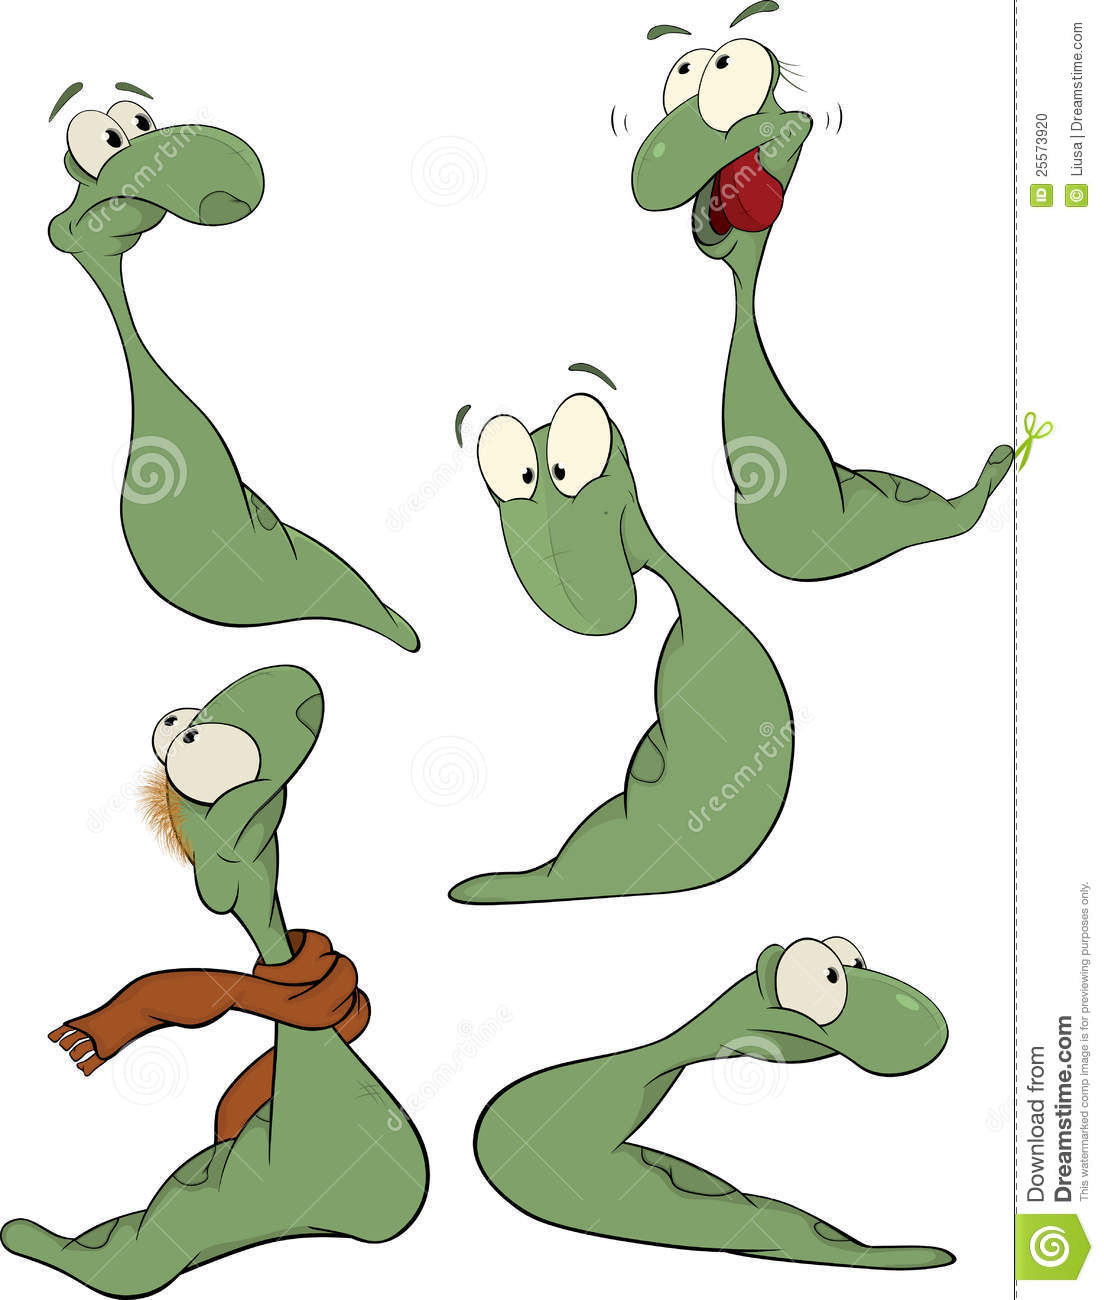 More Similar Stock Images Of   Green Worm  Clip Art